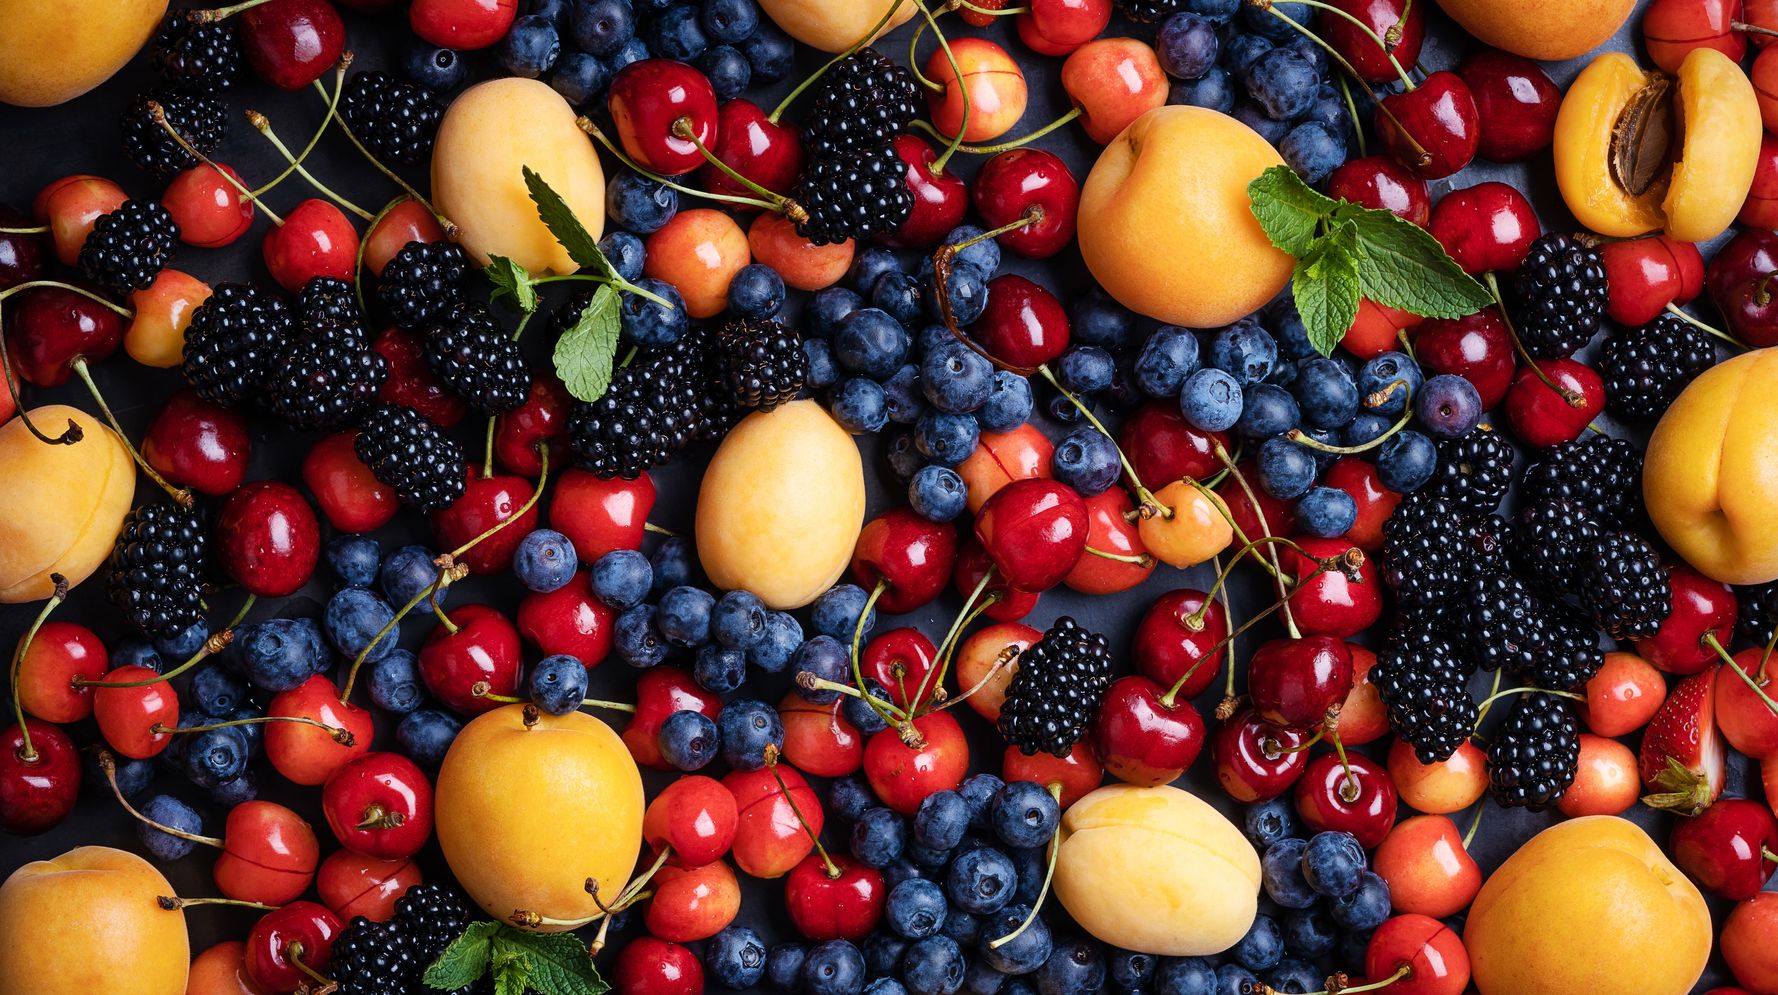 Why Some Summer Fruits Make Your Tongue Itch, Even If You’re Not Allergic